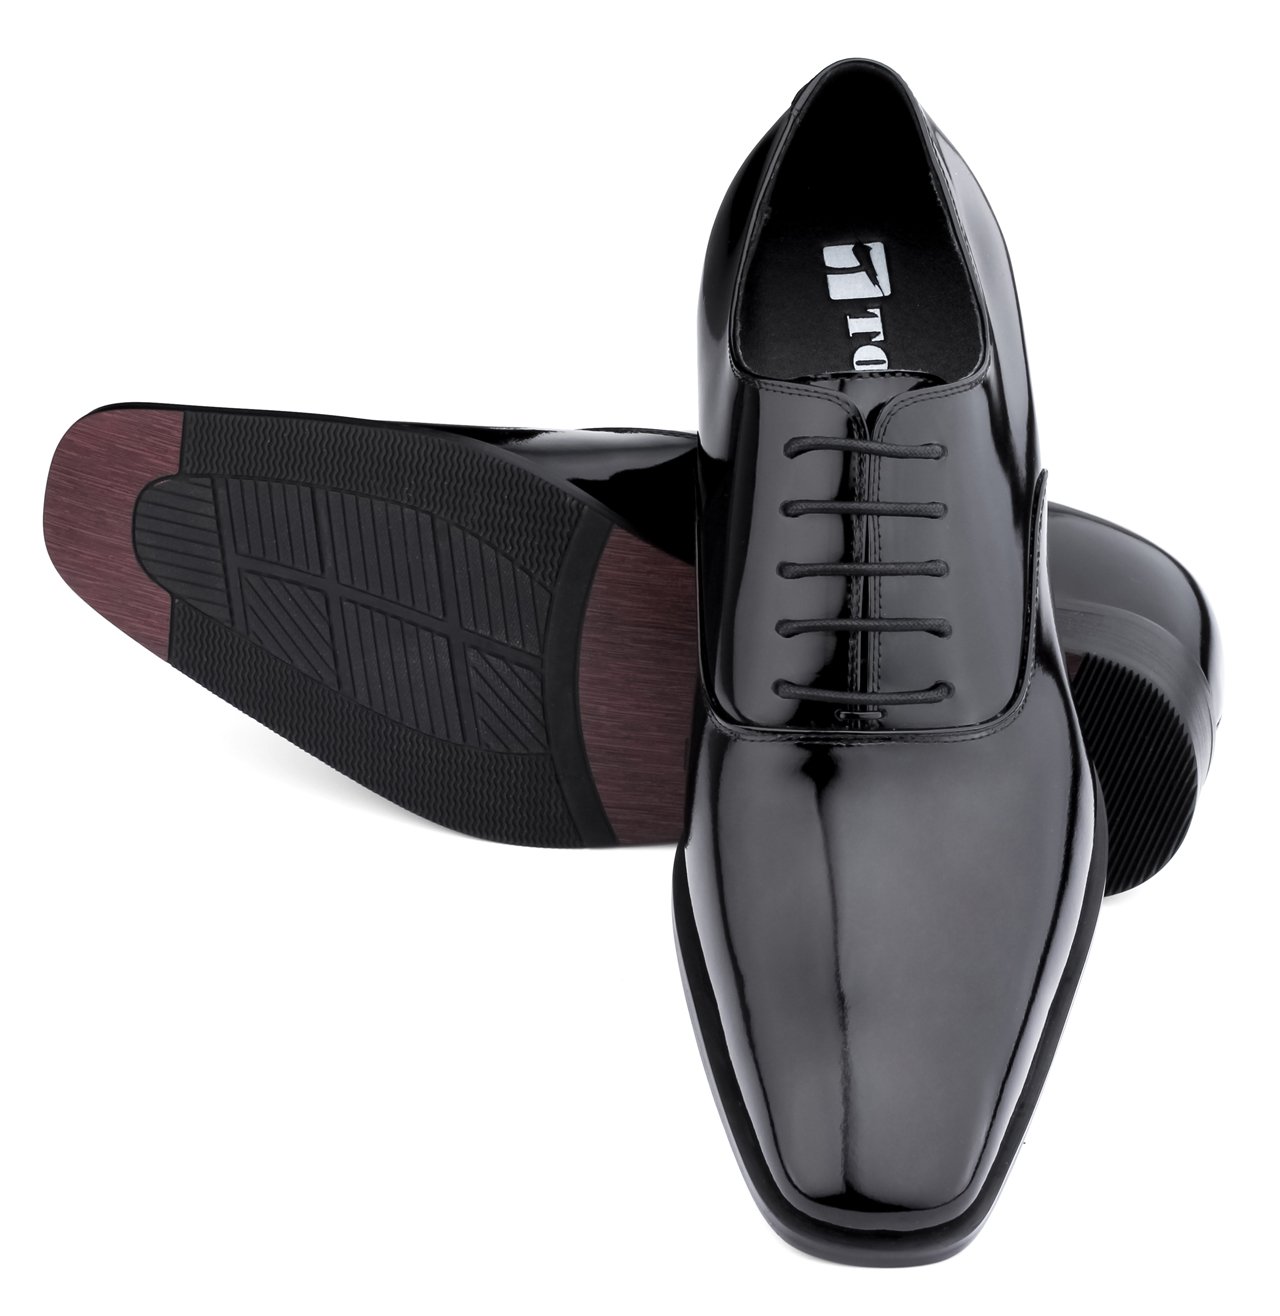 TOTO Men's Invisible Height Increasing Elevator Shoes - Black Patent Leather Lace-up Formal Oxfords - 3 Inches Taller - H6532B